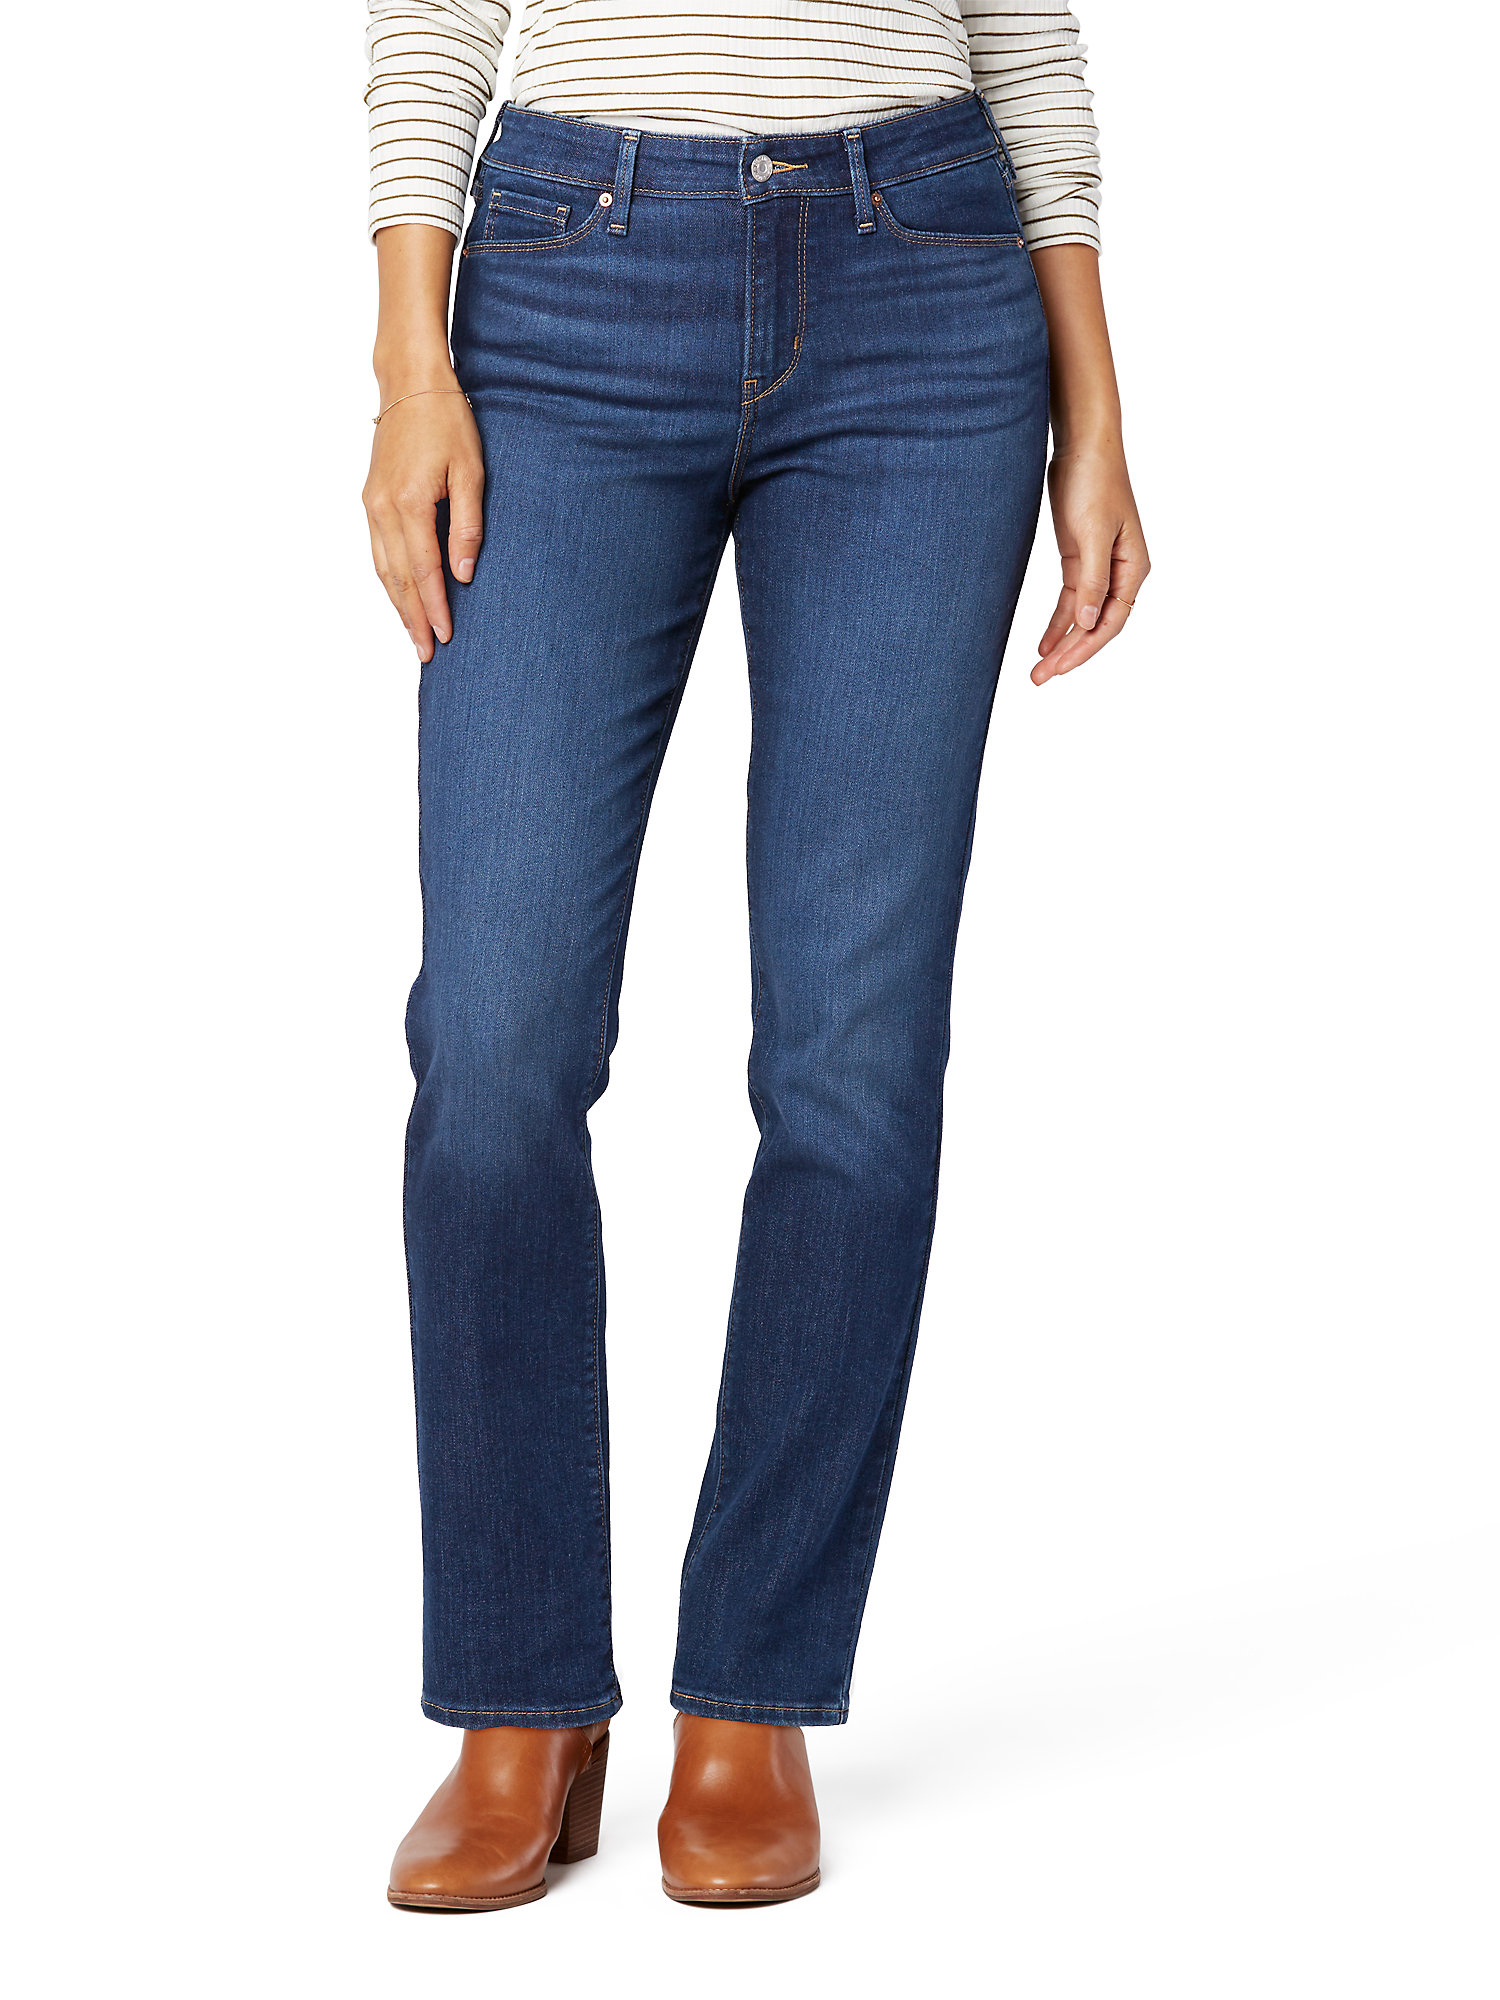 Signature by Levi Strauss & Co. Women's and Women's Plus Size Mid Rise Modern Straight Jeans, Sizes 2-28 - image 1 of 3